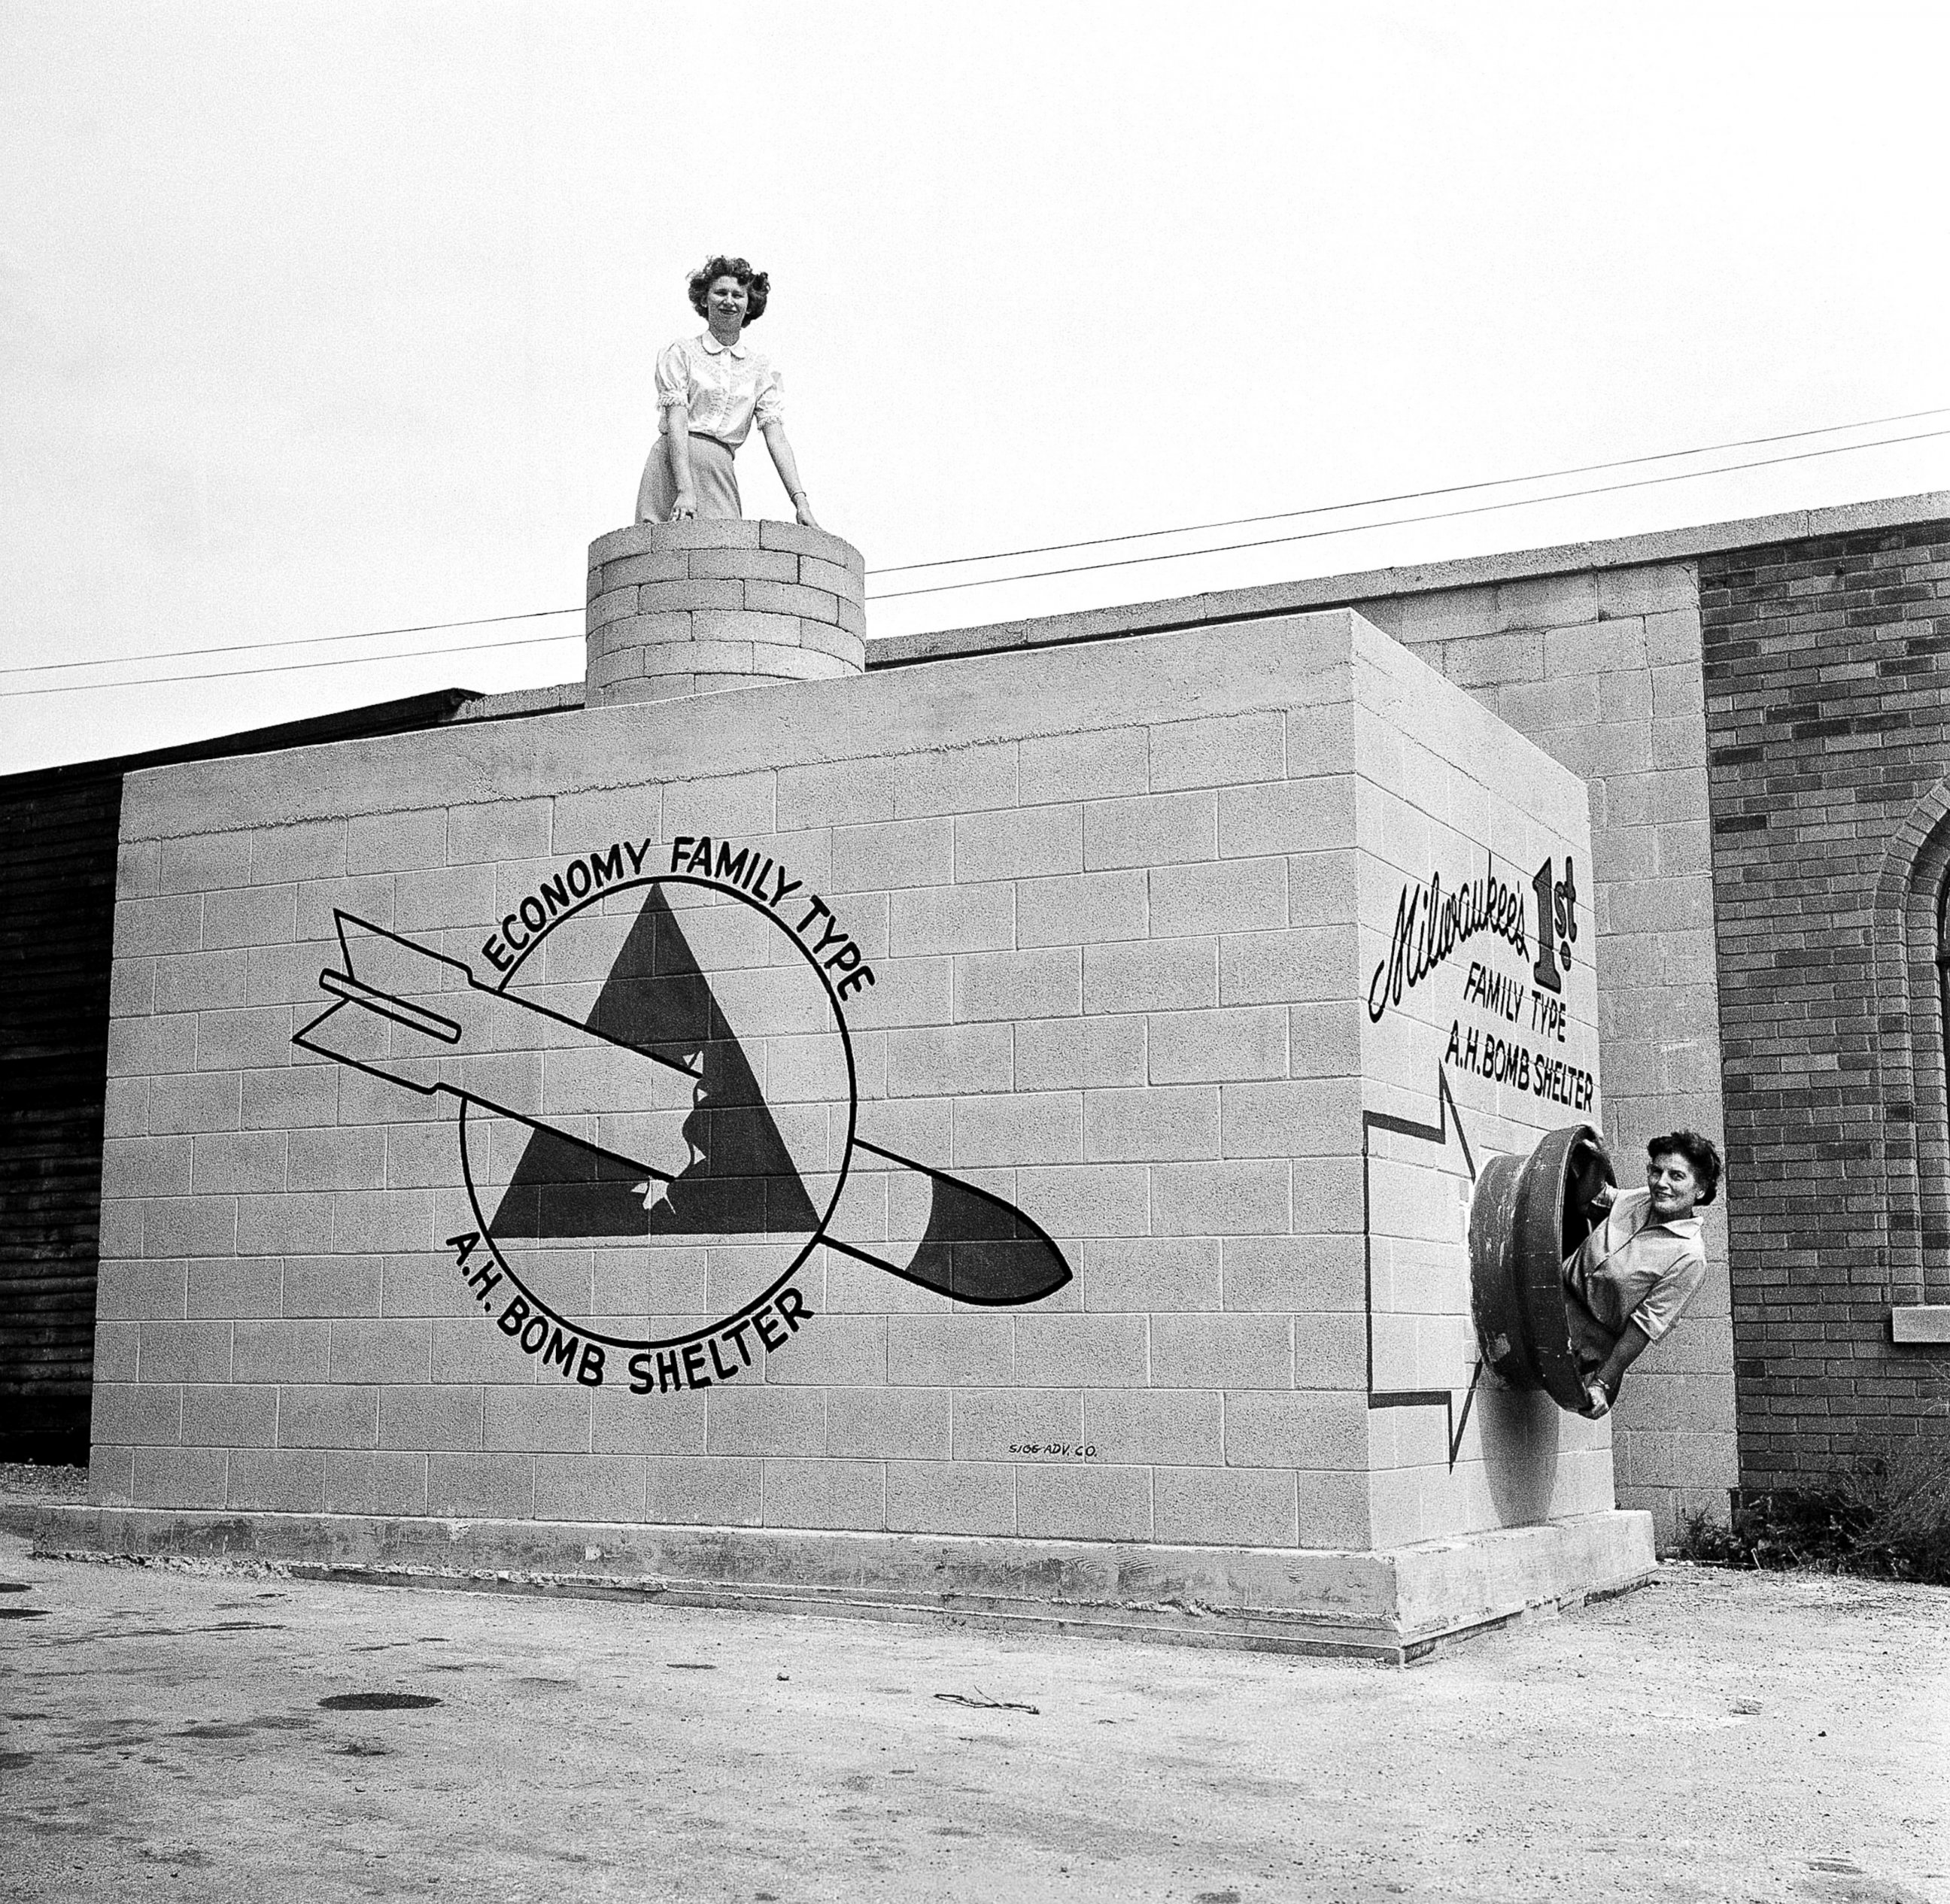 PHOTO: Women emerge from a new family-type bomb shelter on display in Milwaukee, Sept. 12, 1958.